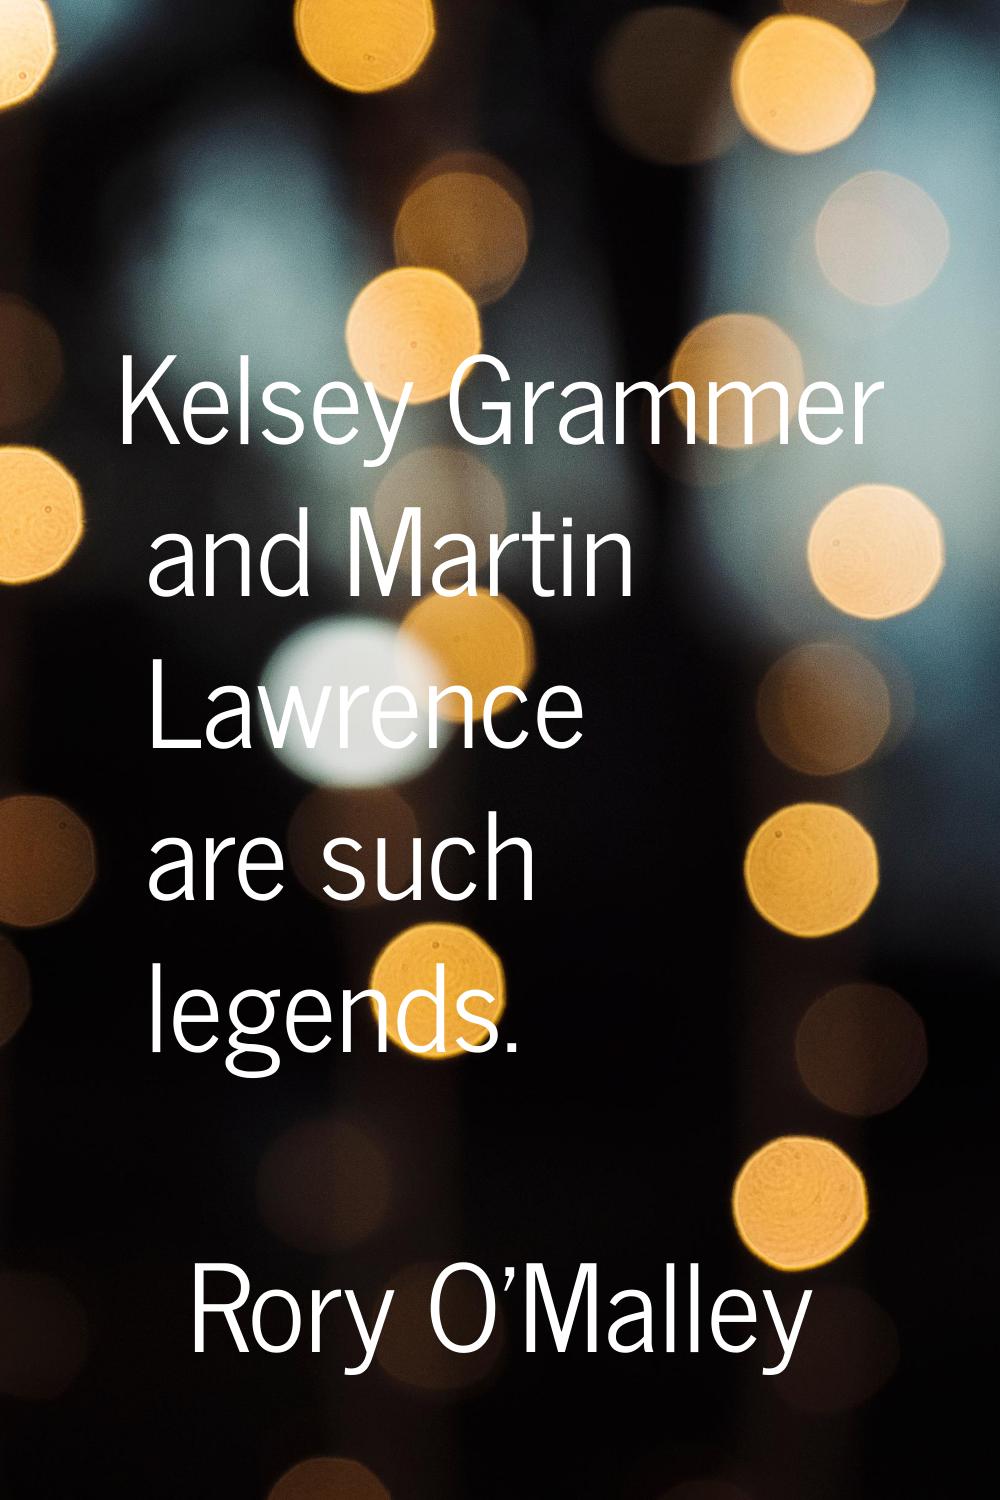 Kelsey Grammer and Martin Lawrence are such legends.